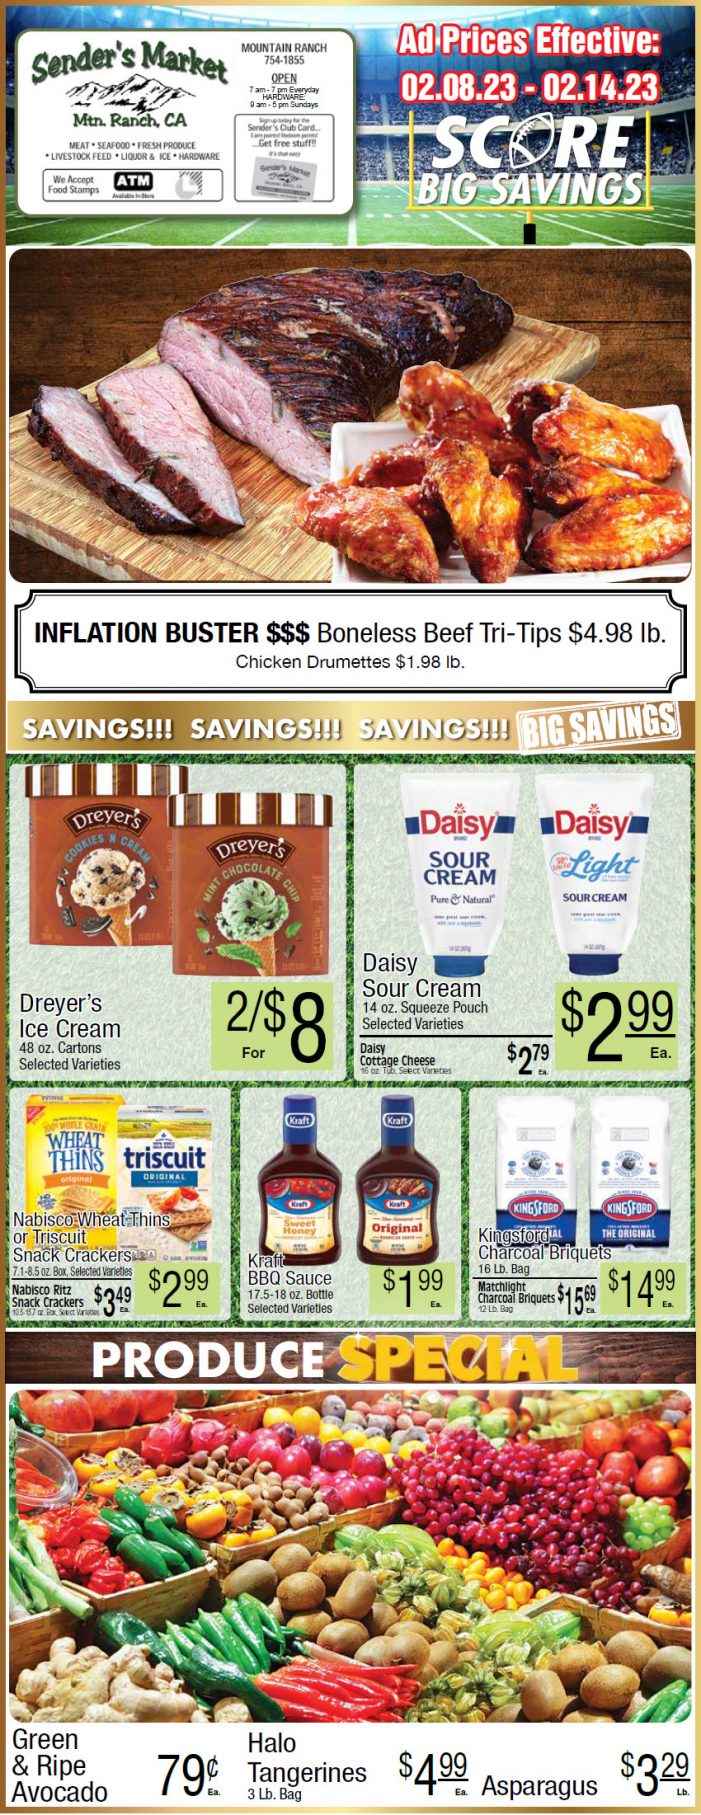 Sender’s Market Weekly Ad & Grocery Specials February 8 – 14th! Shop Local & Save!!